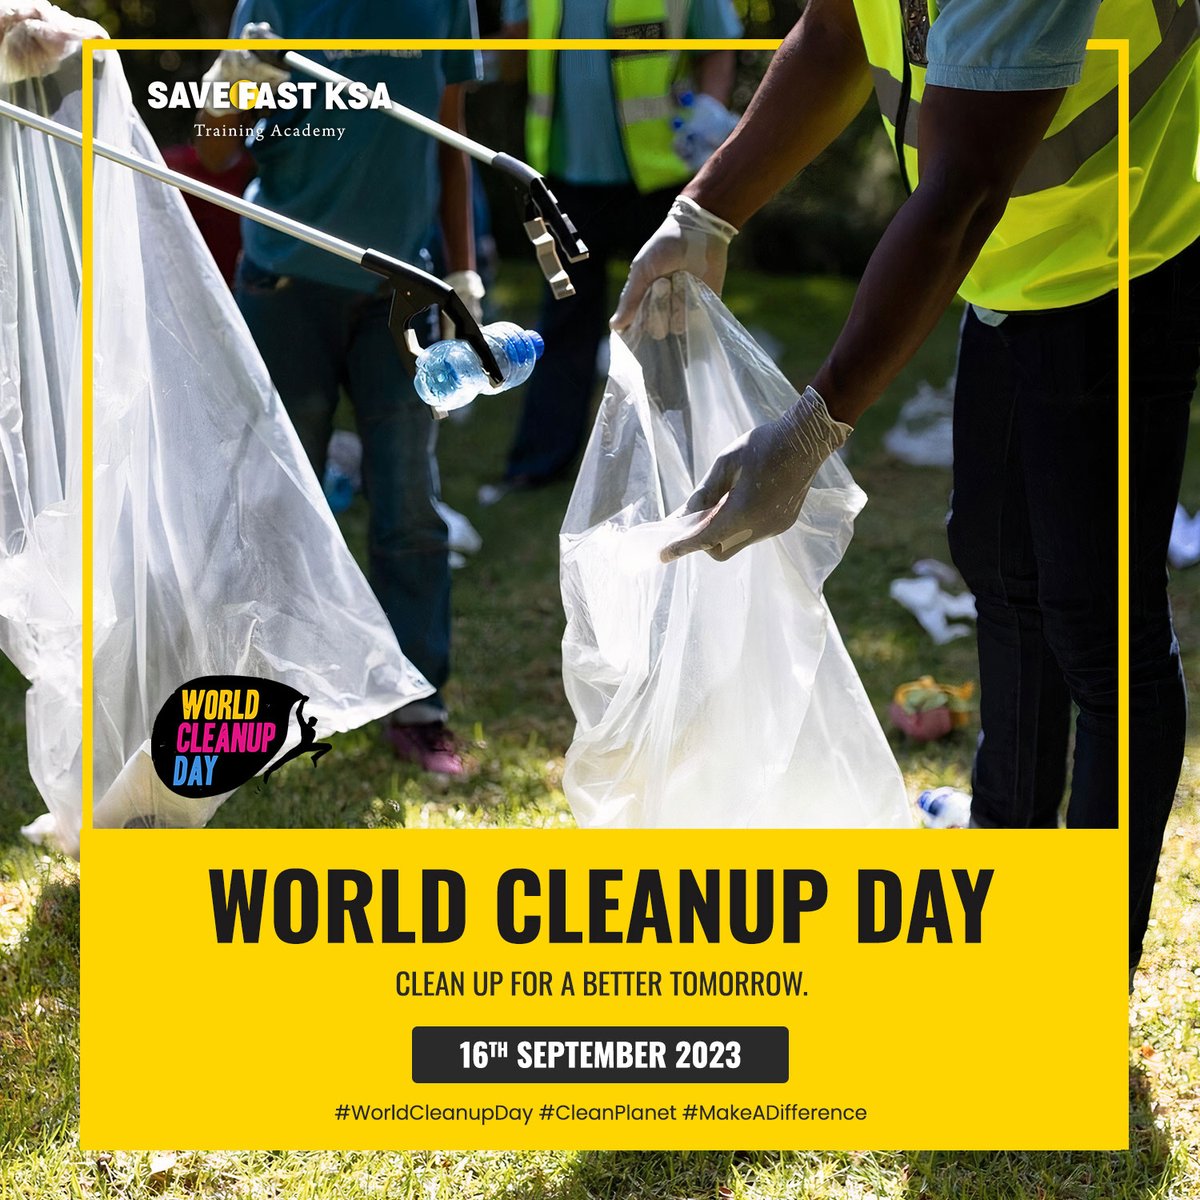 Join the global movement for a cleaner planet on World Cleanup Day! Together, let's make a difference and create a greener, healthier world for future generations. 🌍🌱 

#WorldCleanupDay #CleanPlanet #MakeADifference #SaveFastKSA